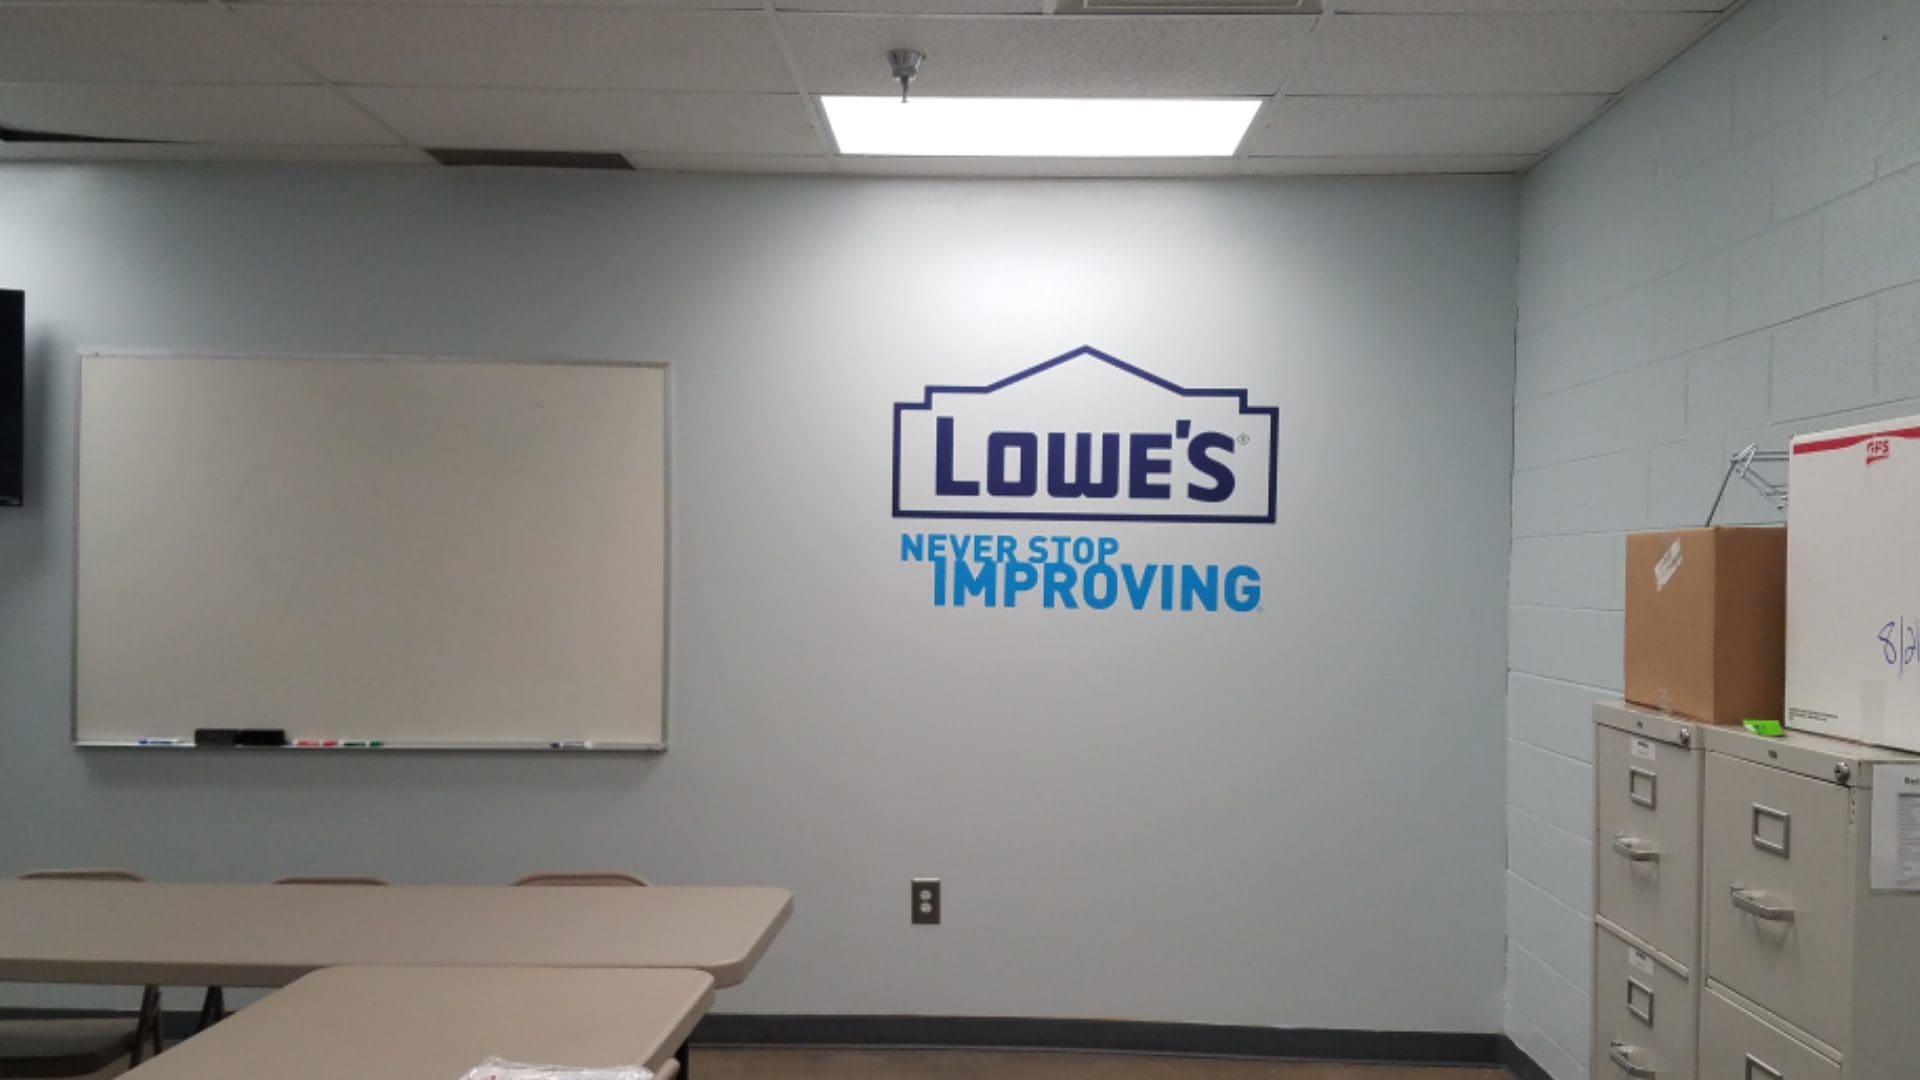 Lowes - Vinyl Wall Graphics (6)